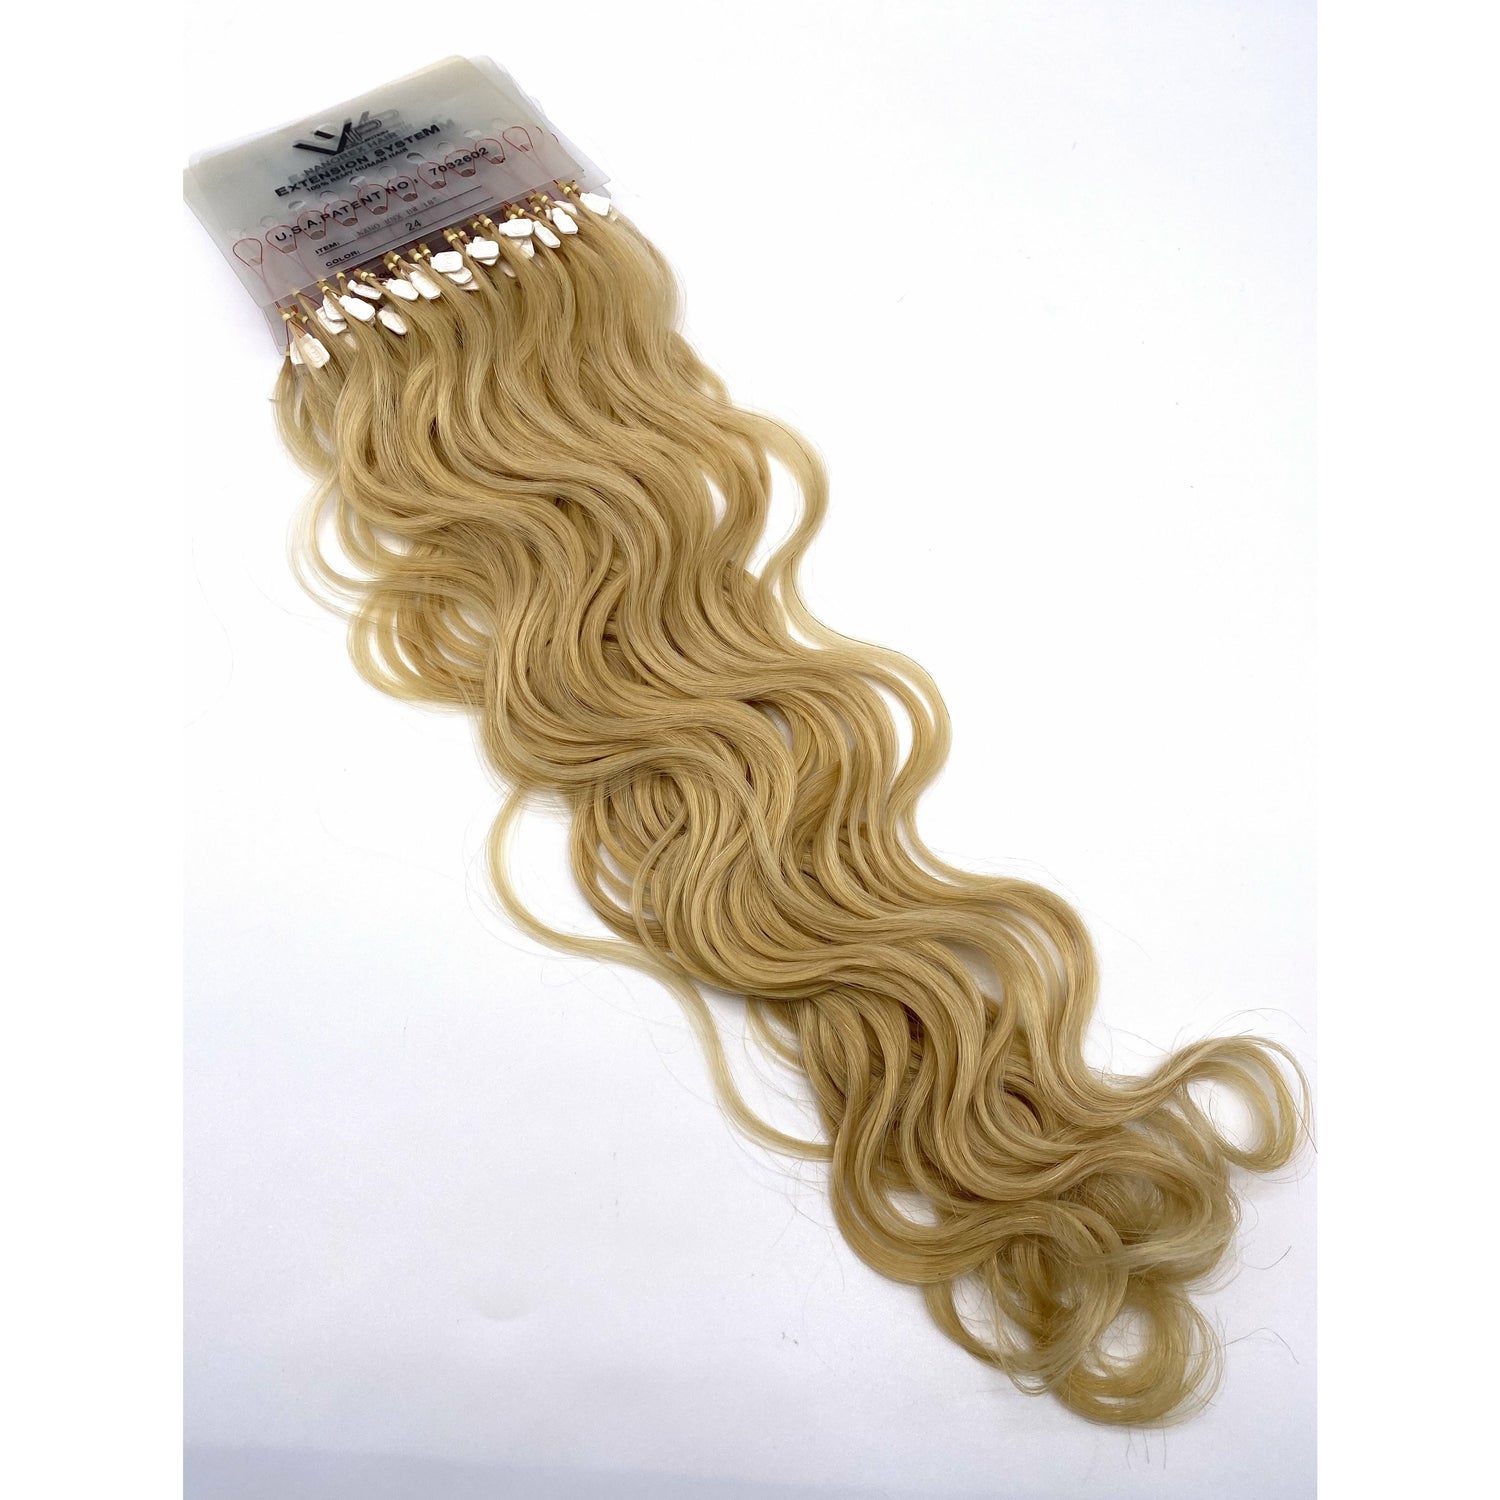 VIP Nanorex System / Body Wave 18" - VIP Extensions